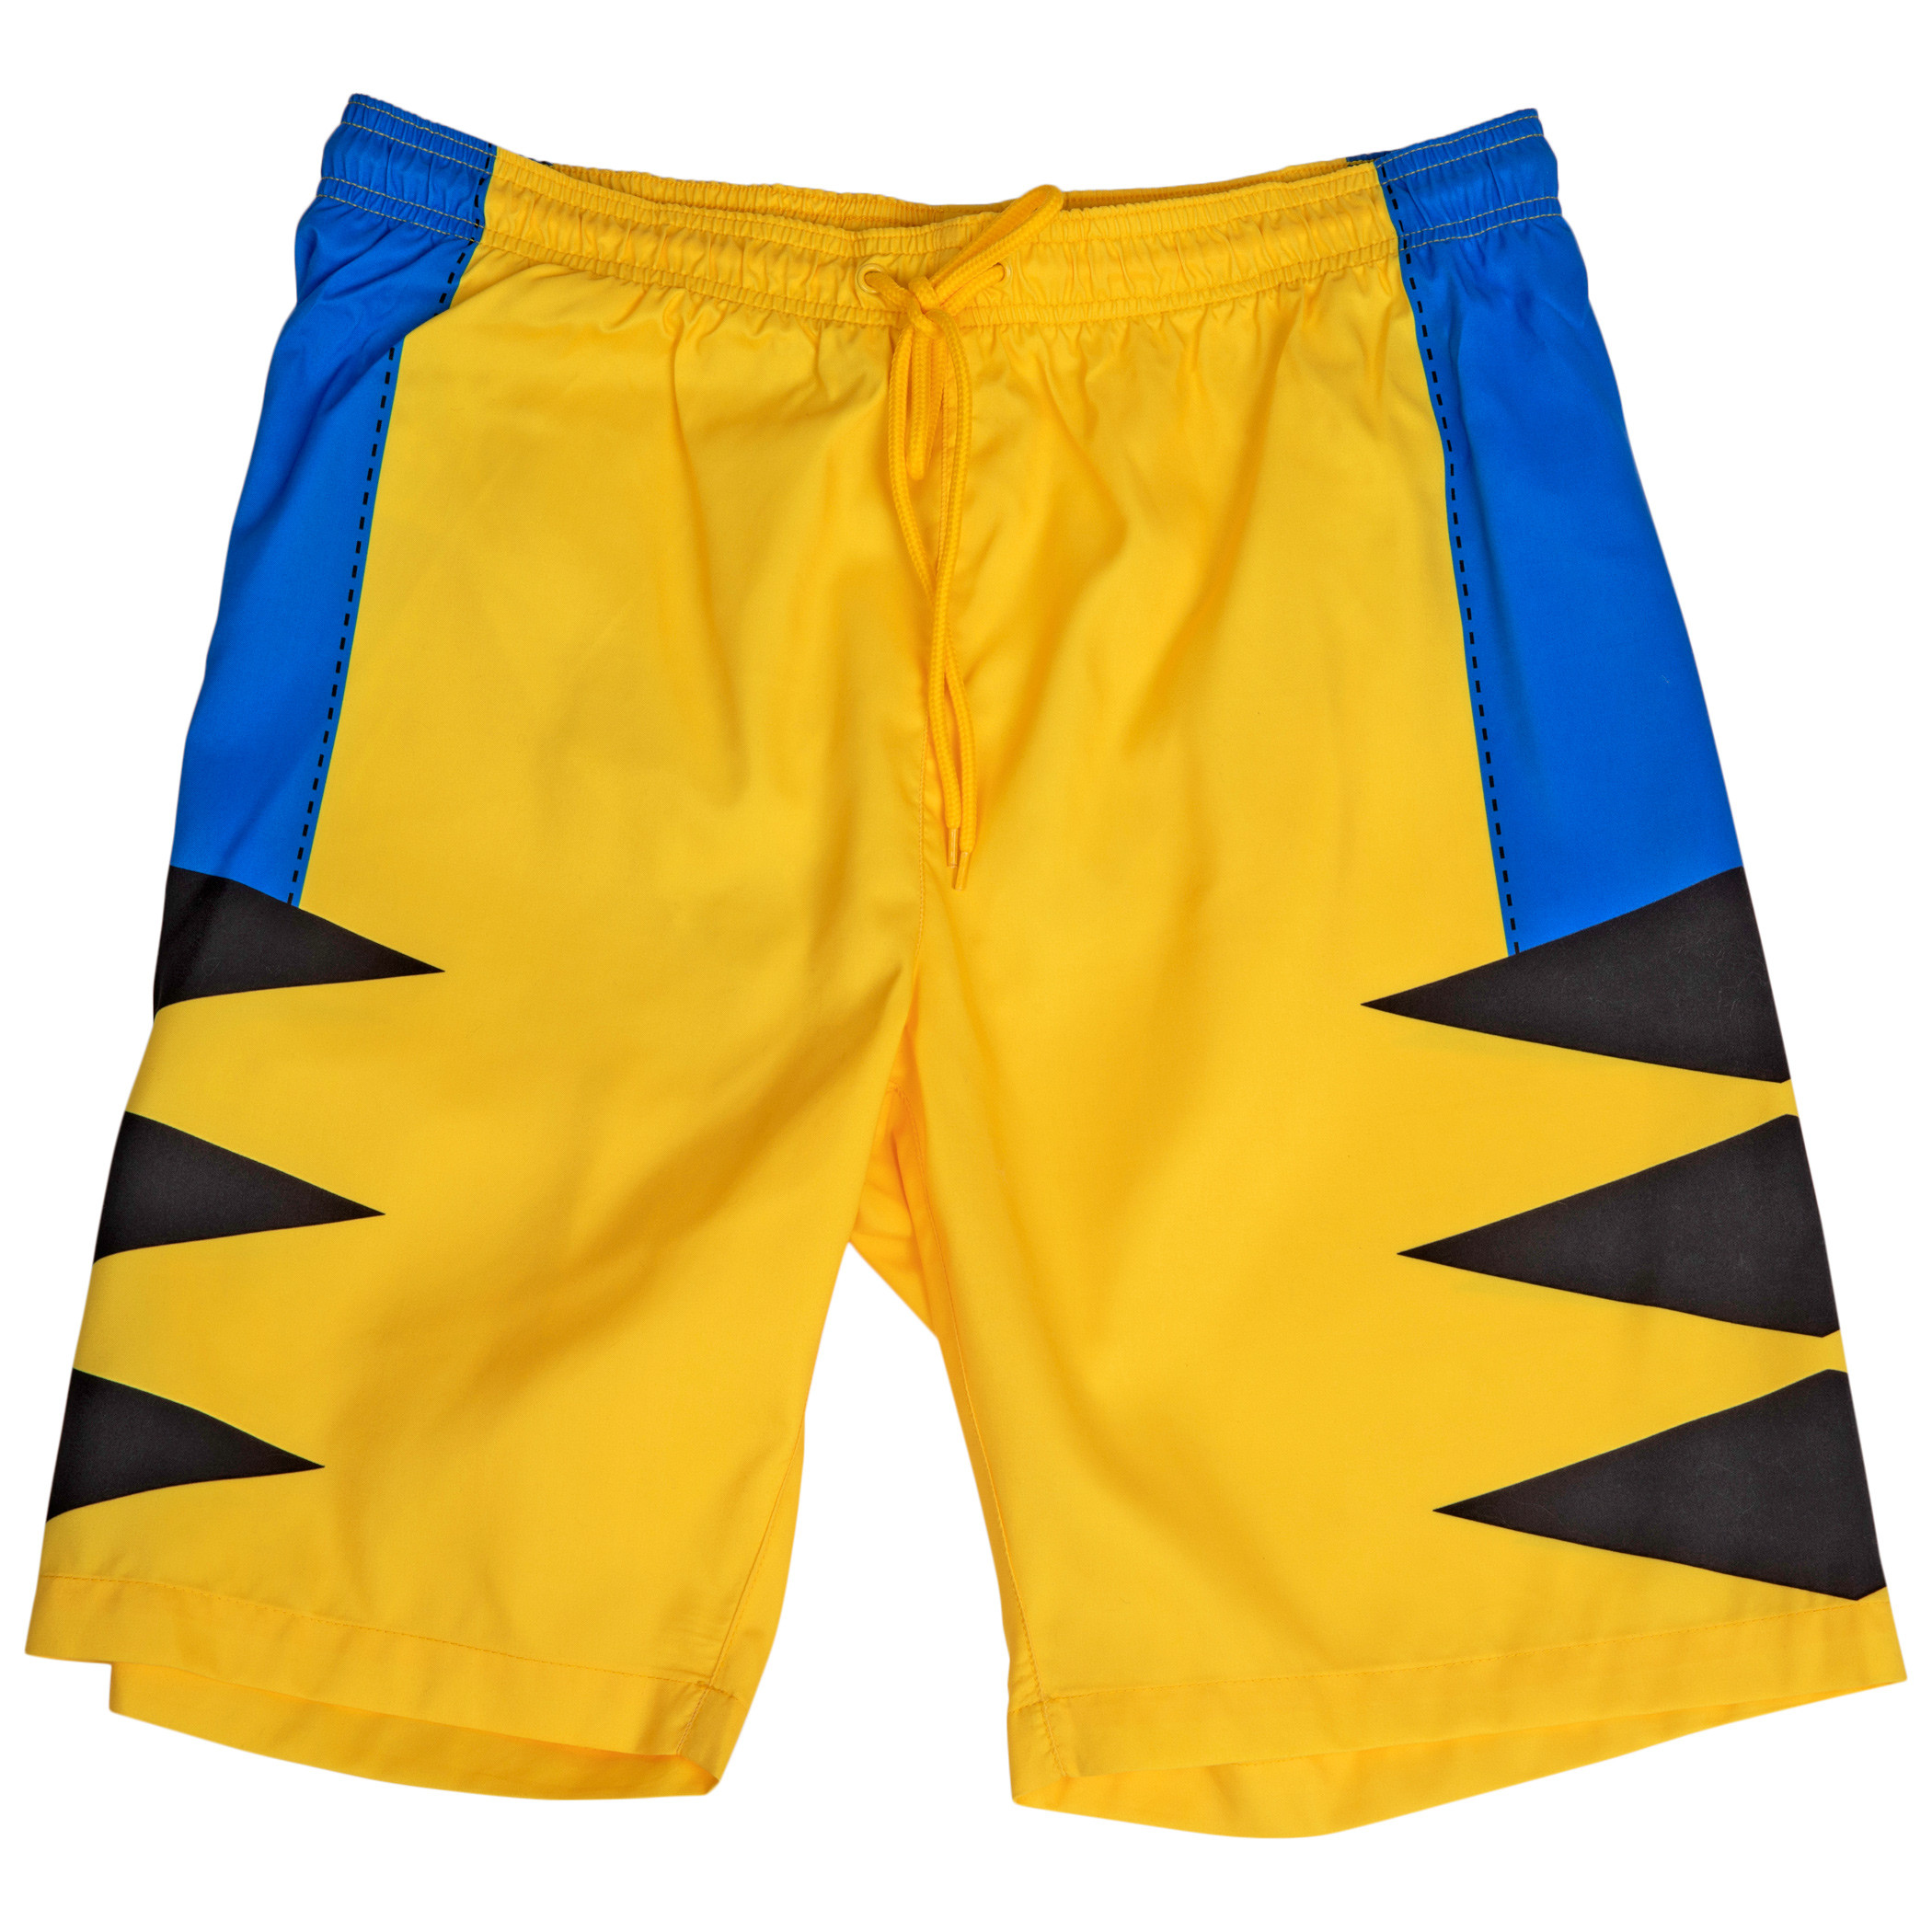 X-Men's Wolverine Character Costume Board Shorts